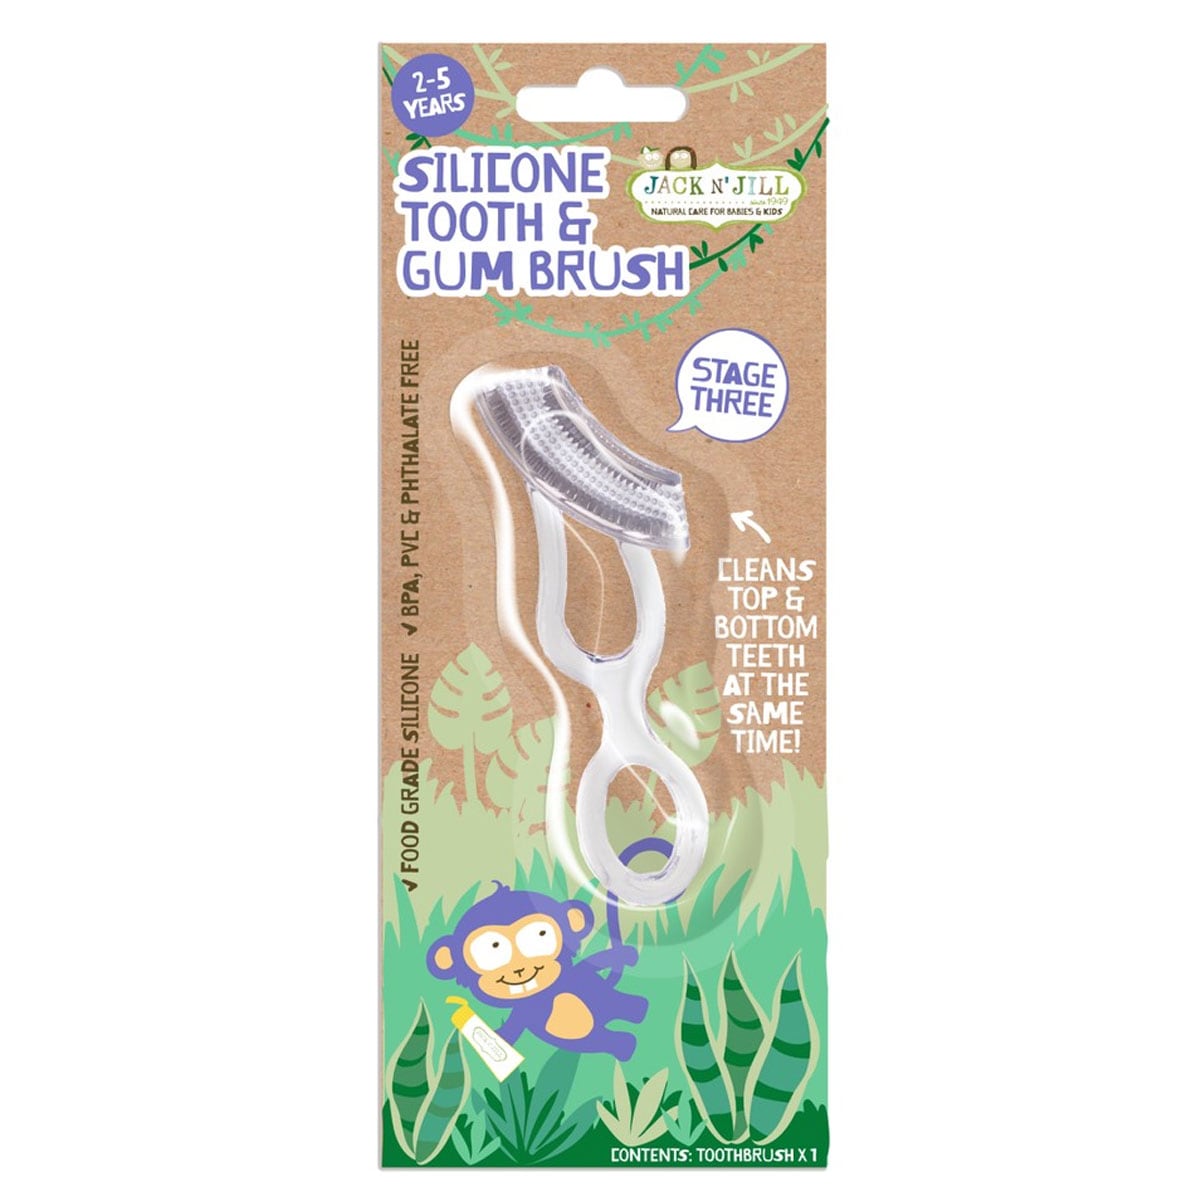 Jack n Jill Stage 3 Silicone Tooth & Gum Brush 1 Pack